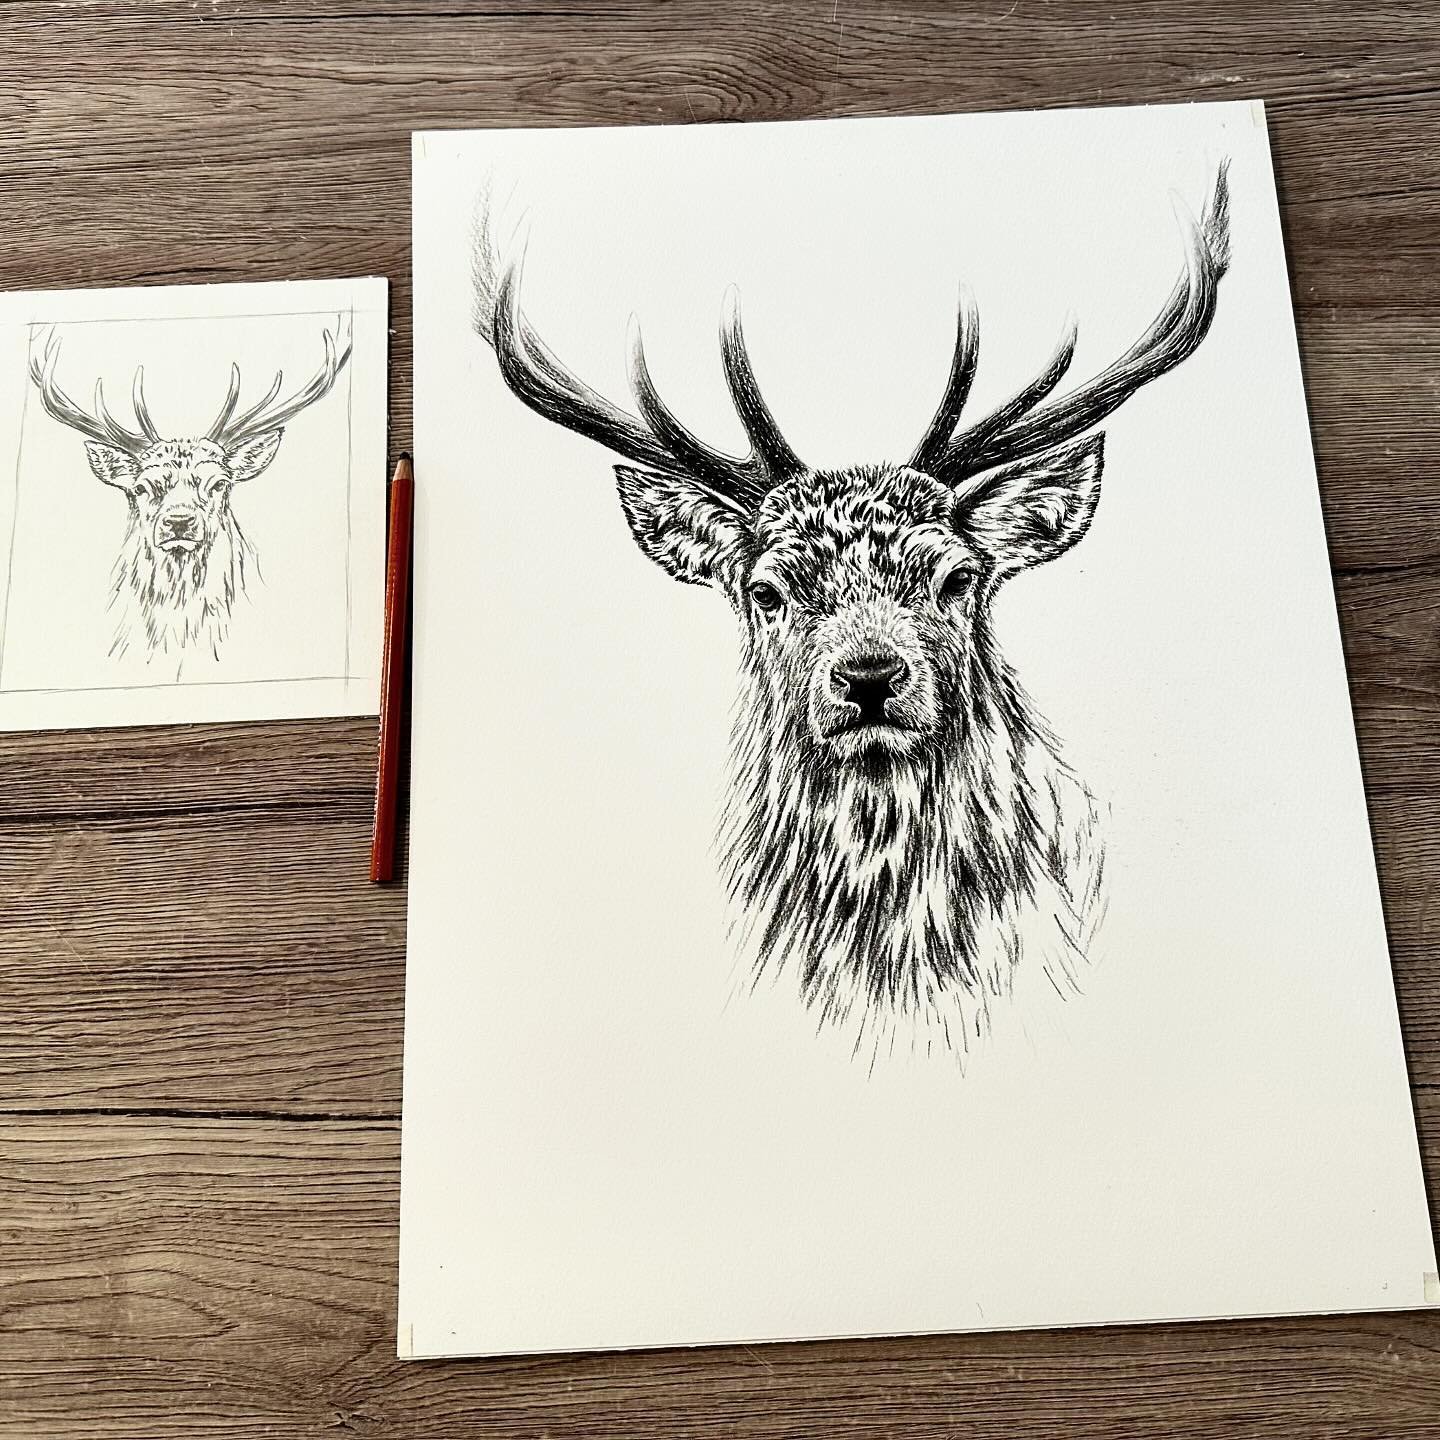 Back working on the stag in the gallery this weekend.